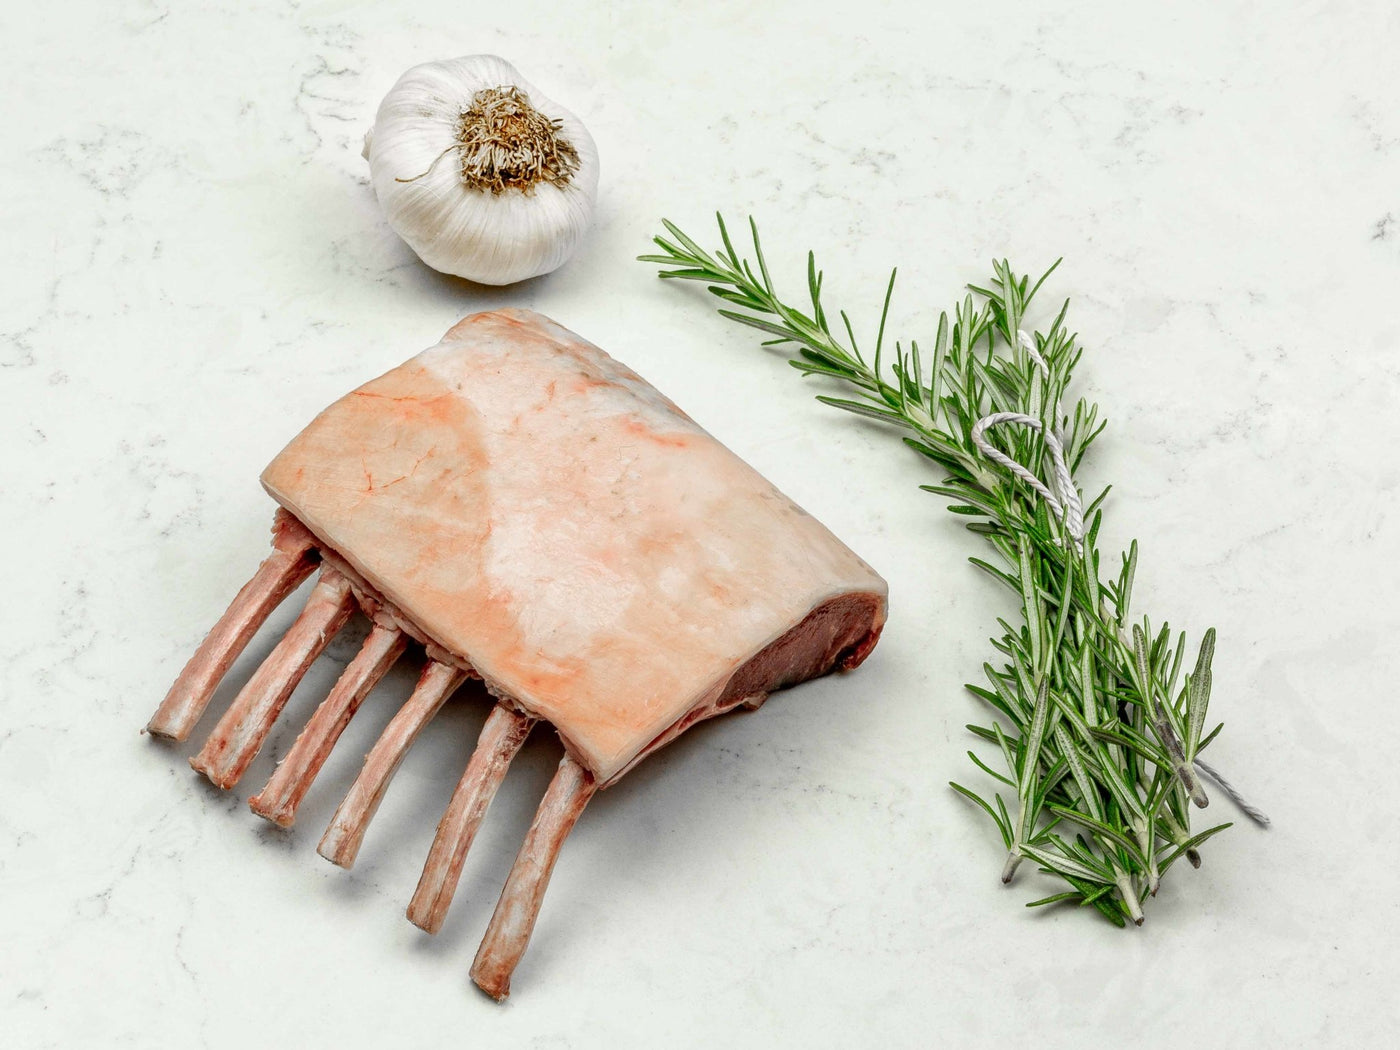 7 Day Dry-Aged, Grass Fed Rack Of Lamb - Lamb - Thomas Joseph Butchery - Ethical Dry-Aged Meat The Best Steak UK Thomas Joseph Butchery